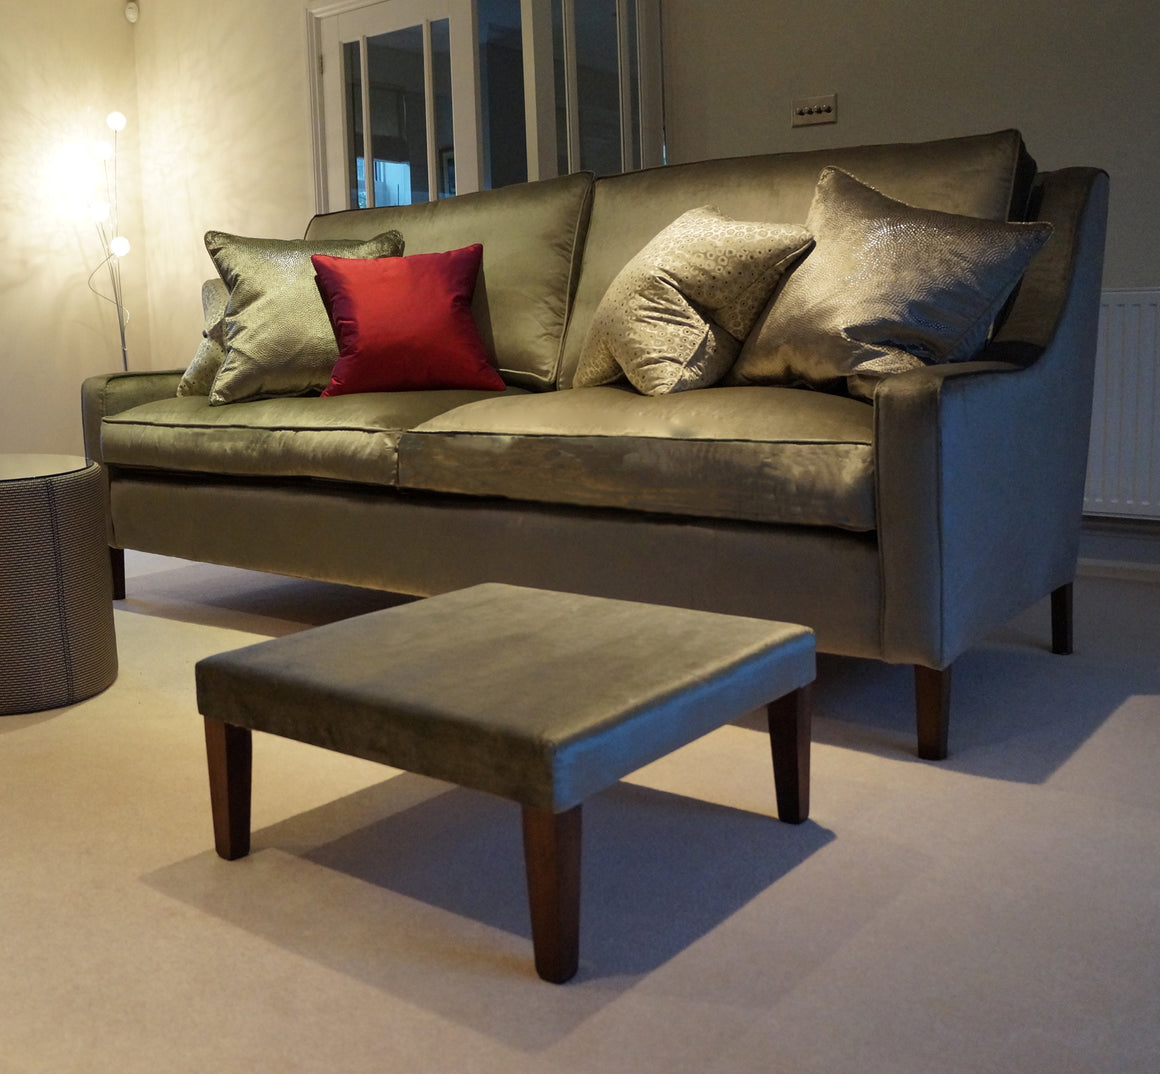 A Marlow Cushion Back Sofa and Chairs